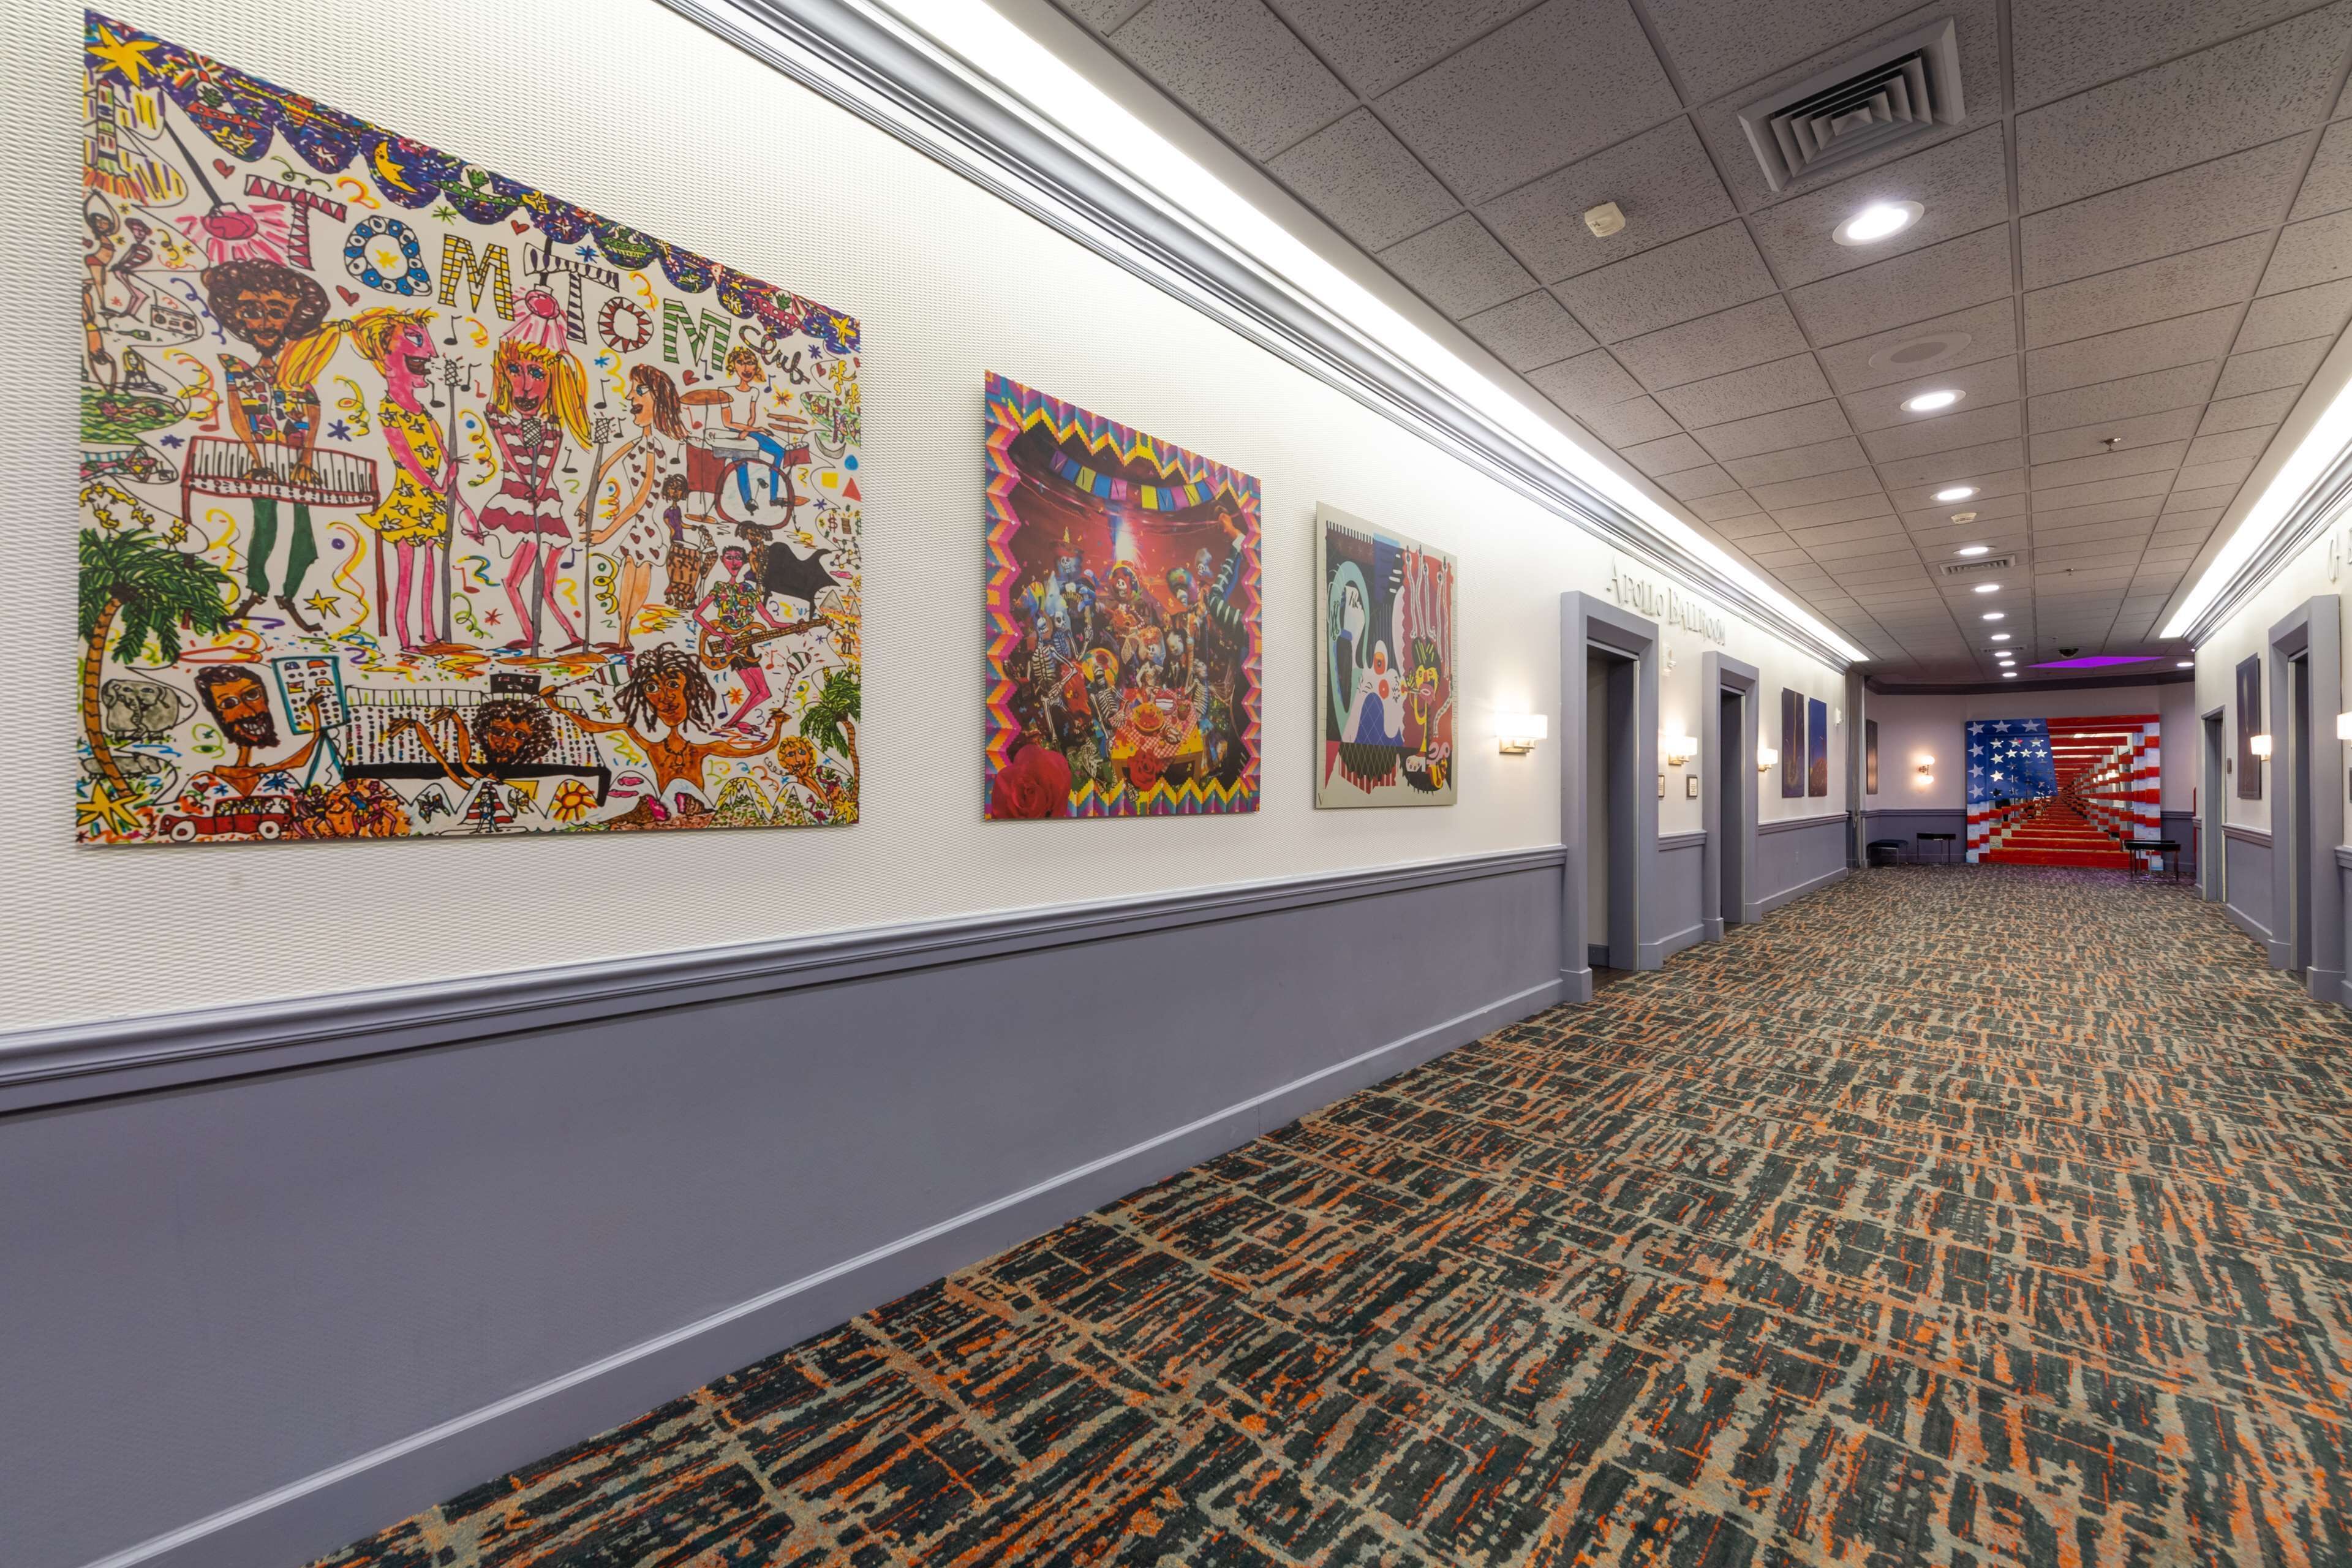 The Verve Boston Natick, Tapestry Collection by Hilton